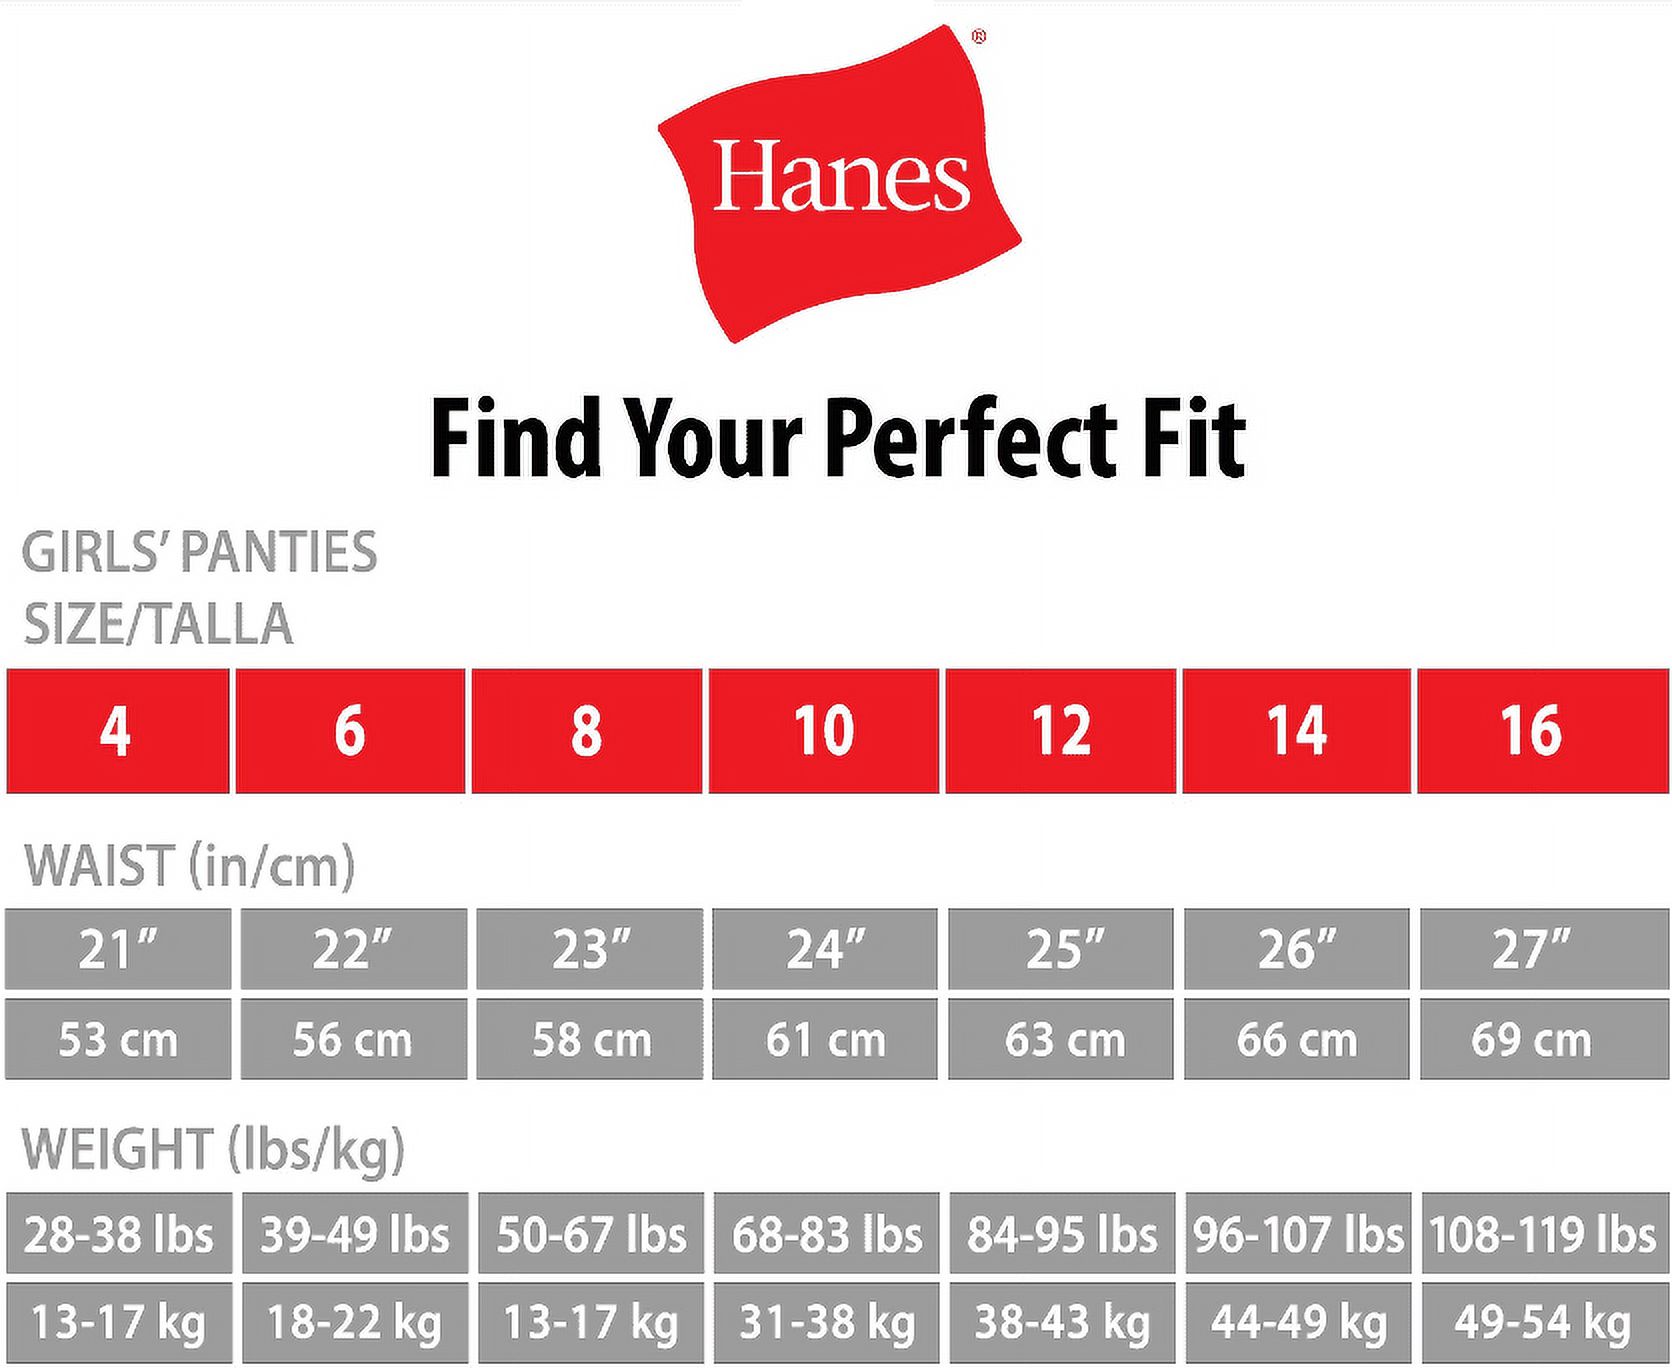 Hanes Toddler Girl Hipster Panty, 6 Pack, Sizes 2T-5T - image 4 of 4